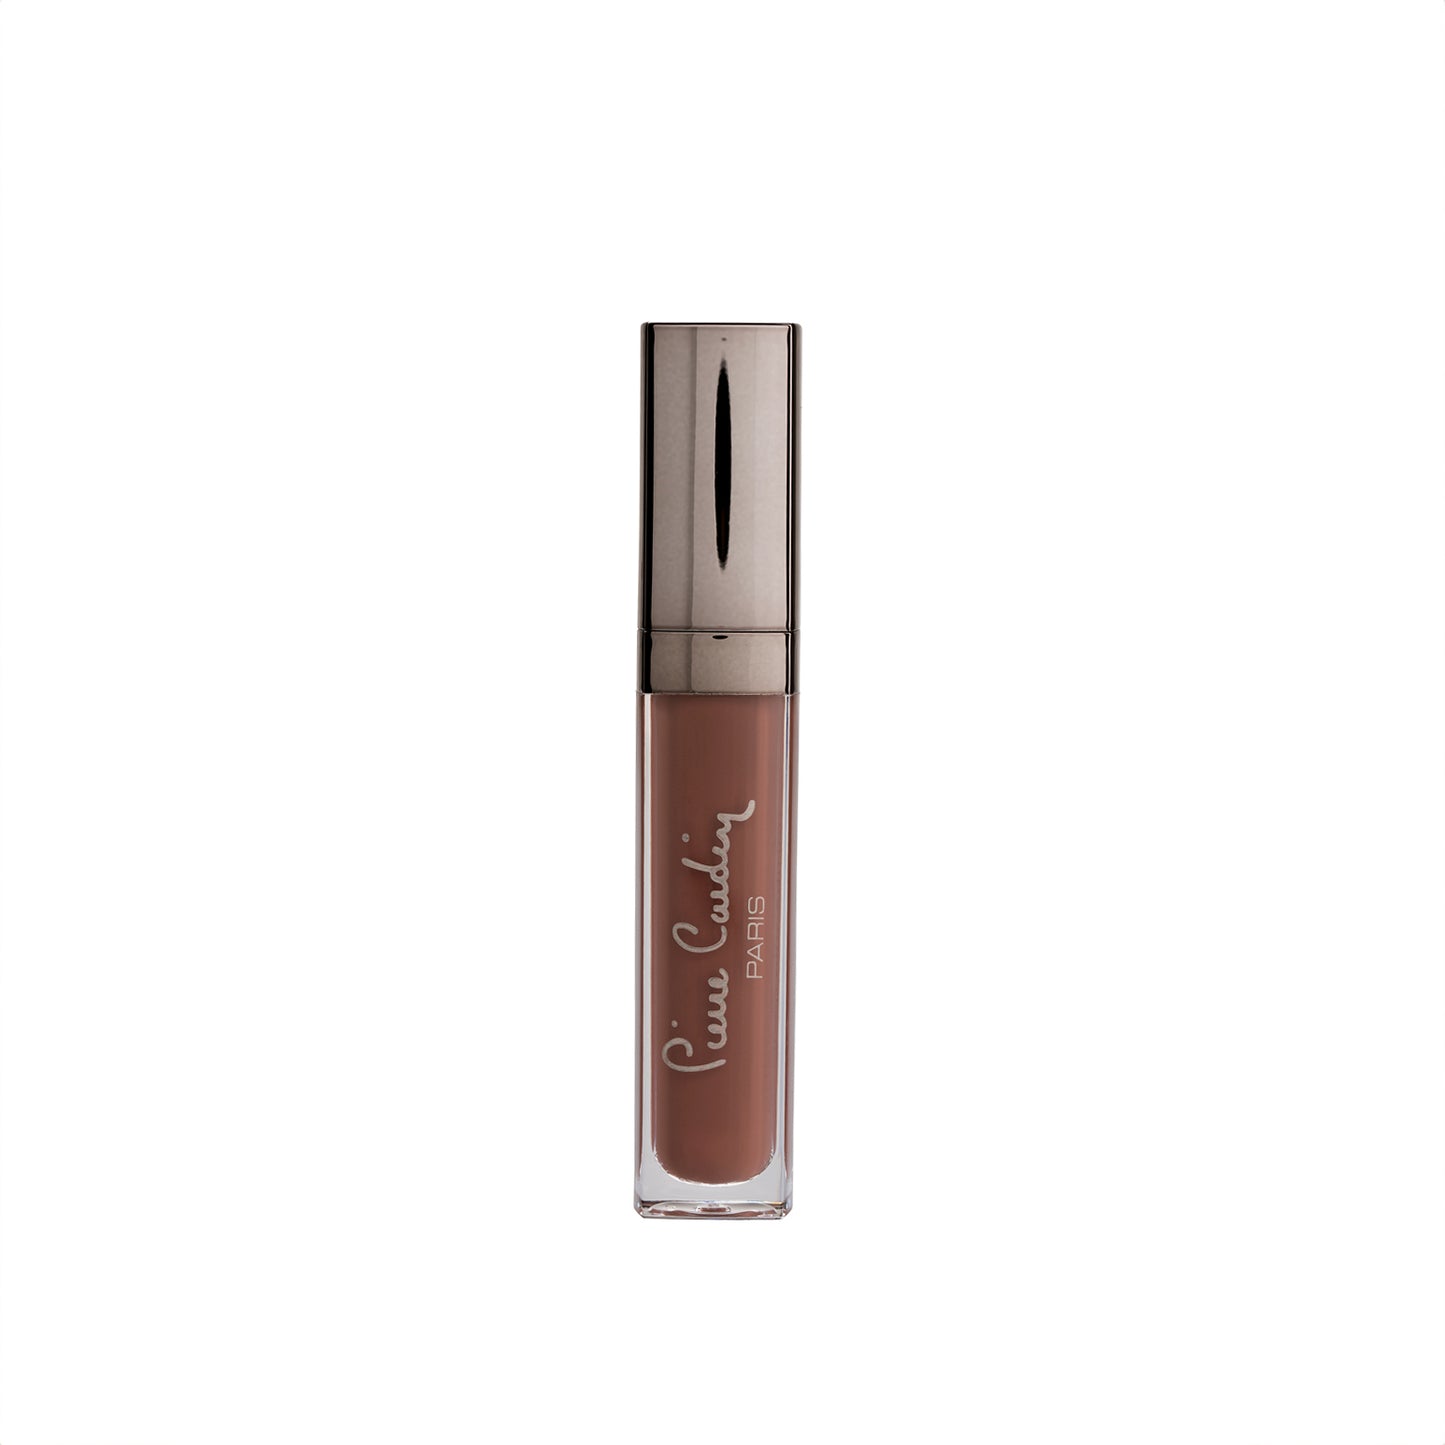 Pierre Cardin Photoflash Lipgloss – Glow Color Edition Toffee Nut 145 - 9 ml